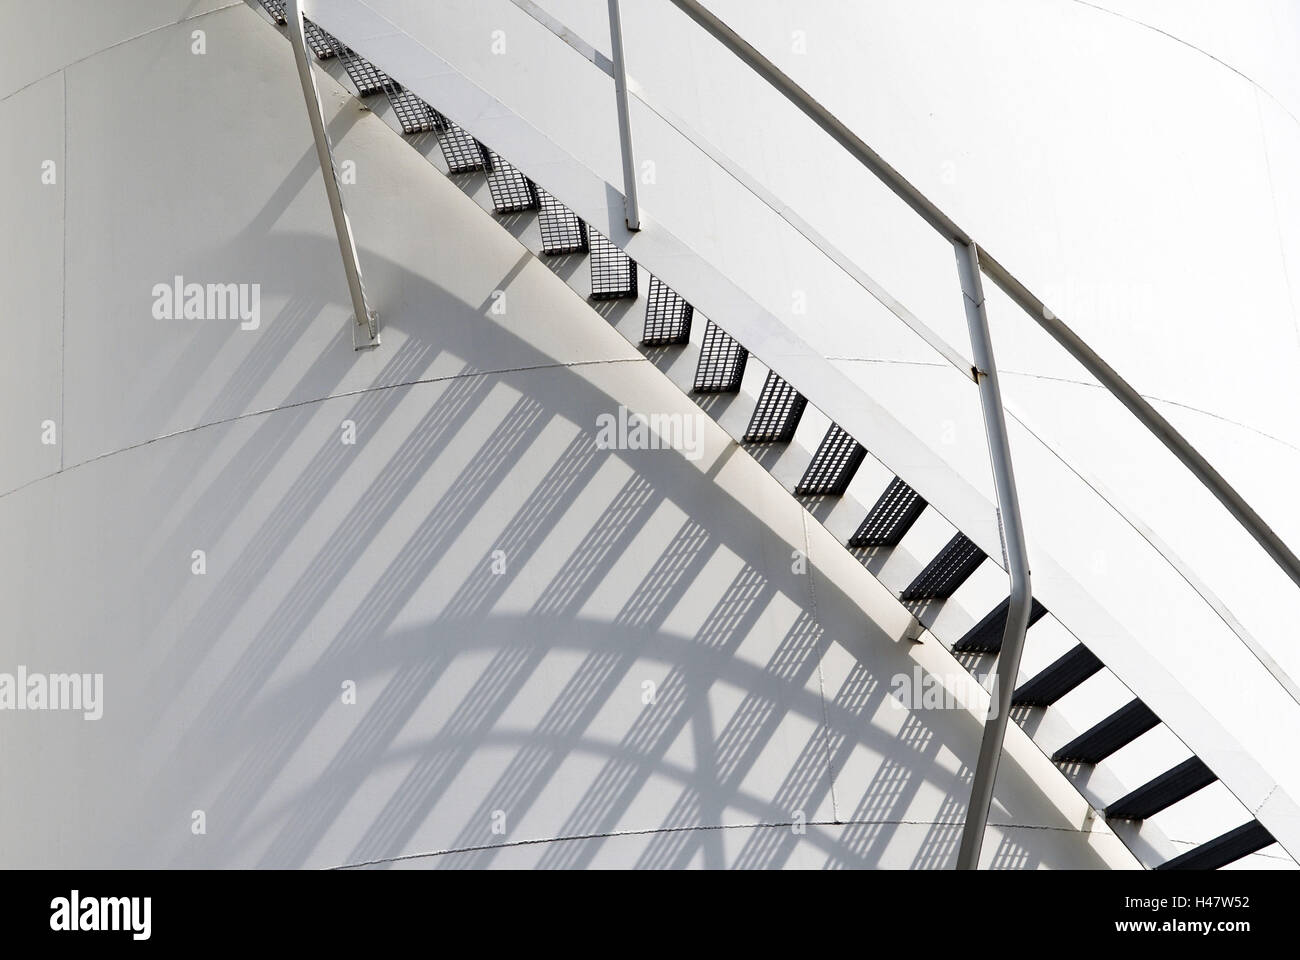 Stairs, tank, steps, railings, spiral, shades, Stock Photo